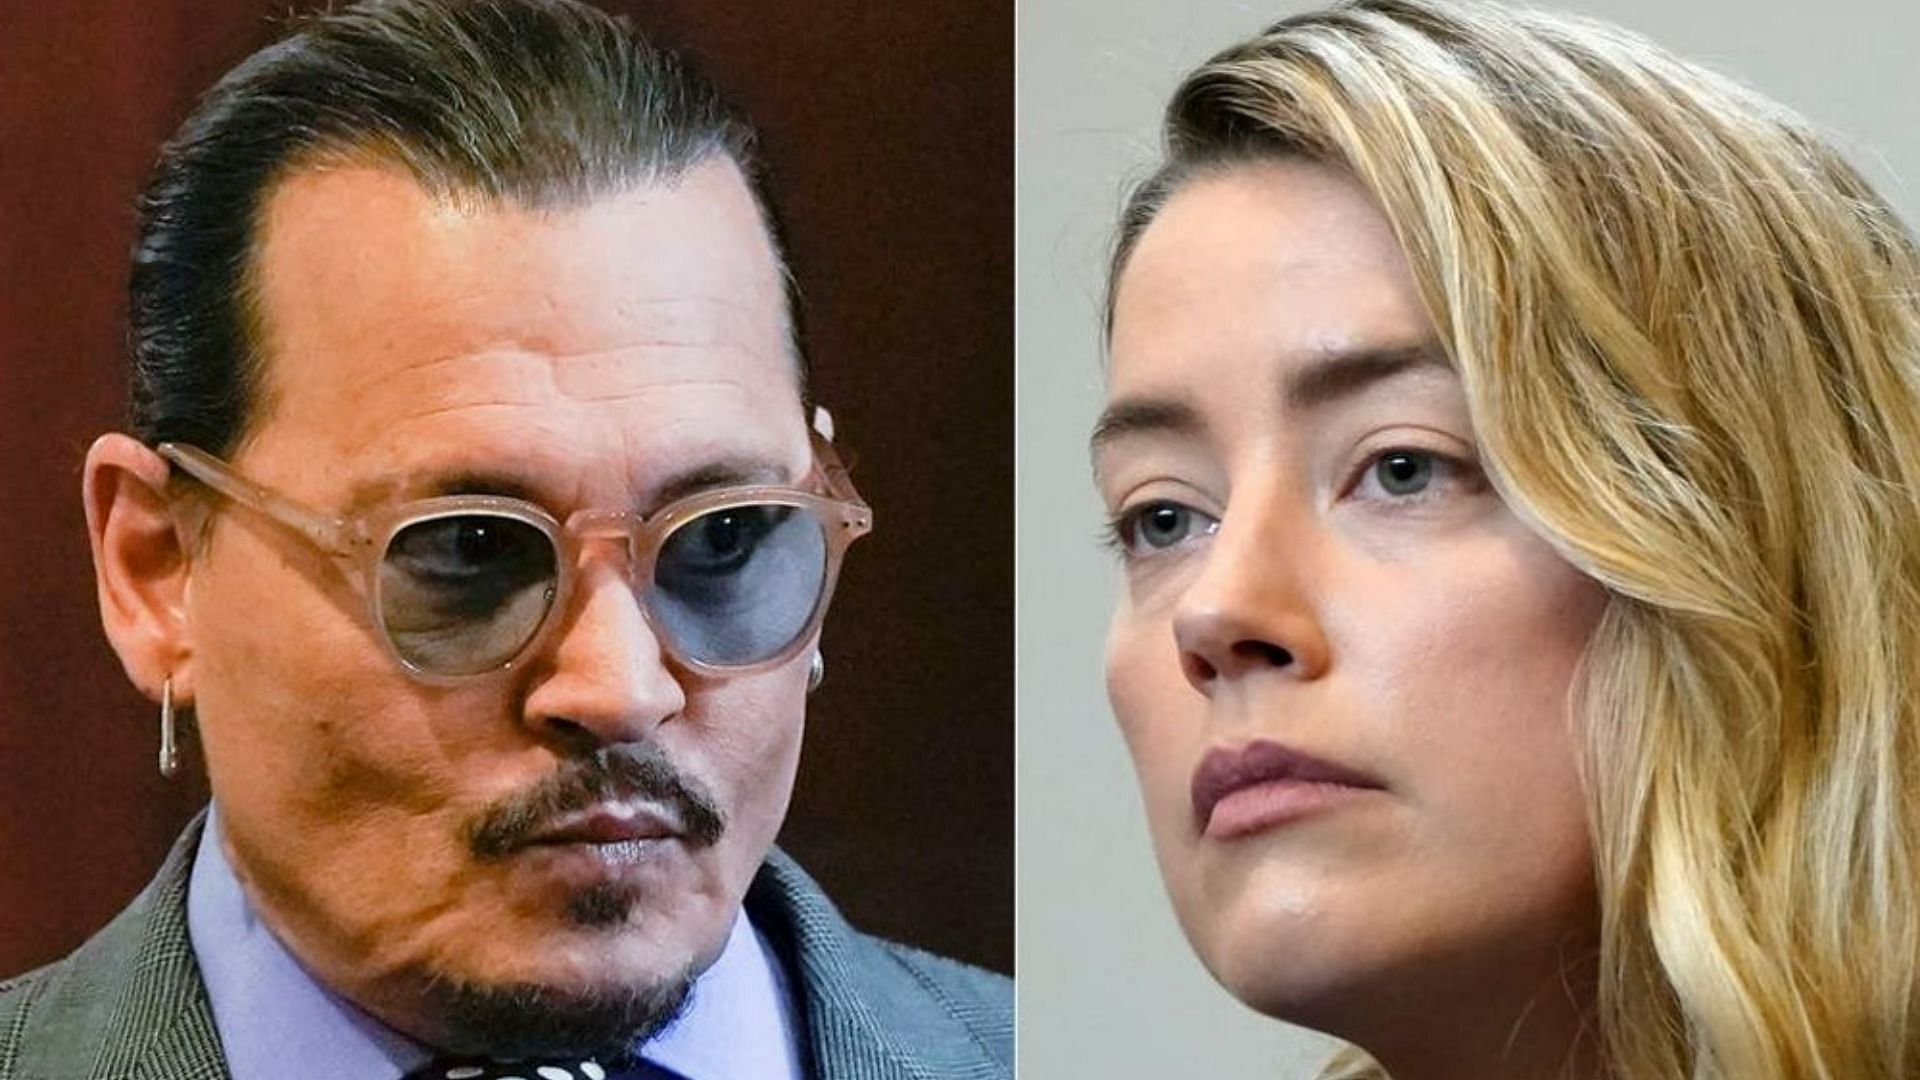 Defamation trial between Johnny Depp and Amber Heard to continue from today, May 16 (Image via AP)